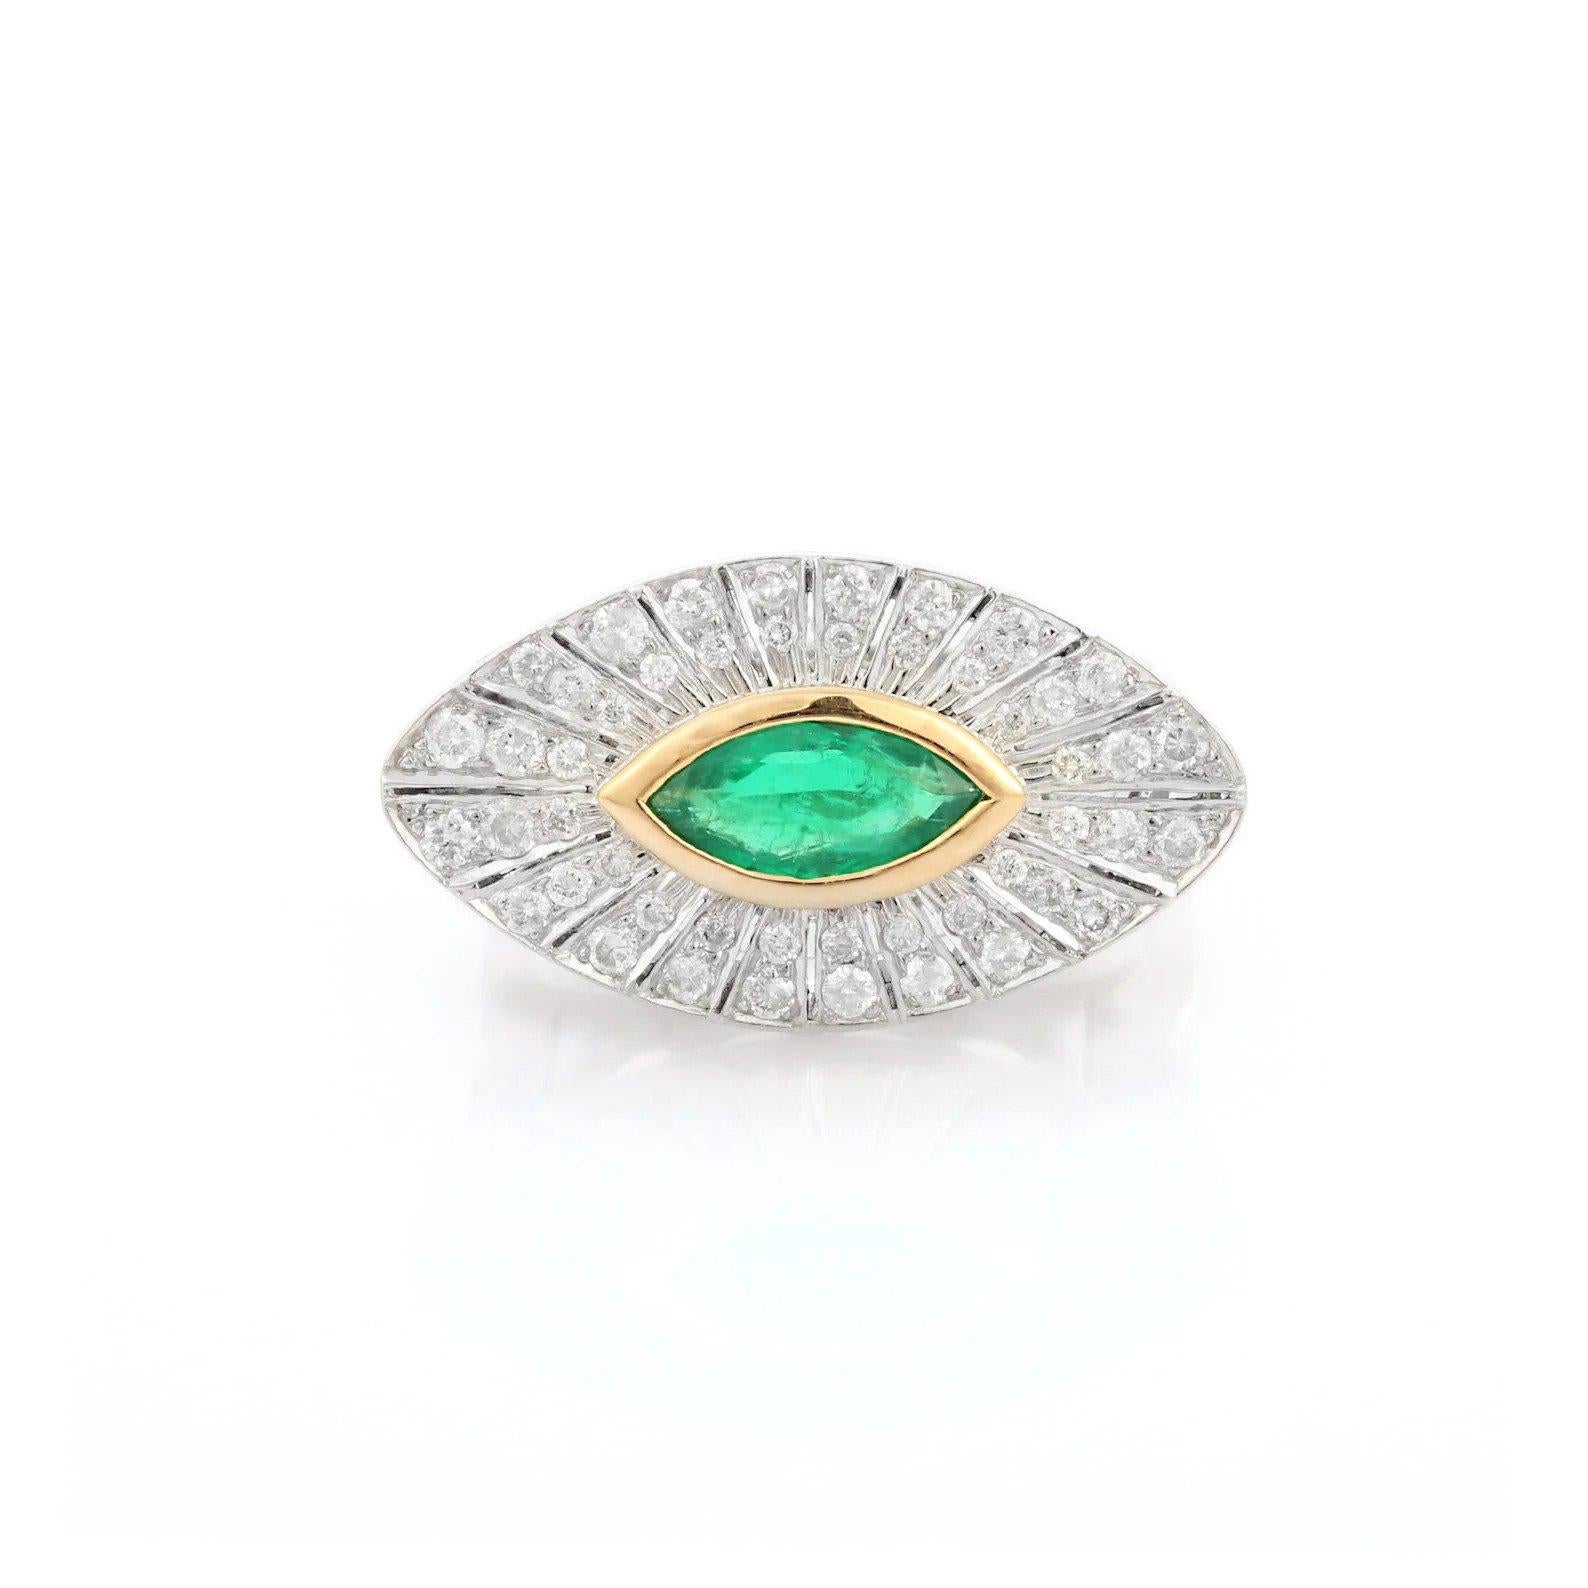 This ring has been meticulously crafted from 14-karat gold.  It is hand set with .76 carats emerald & .91 carats of sparkling diamonds. 

The ring is a size 7 and may be resized to larger or smaller upon request. 
FOLLOW  MEGHNA JEWELS storefront to